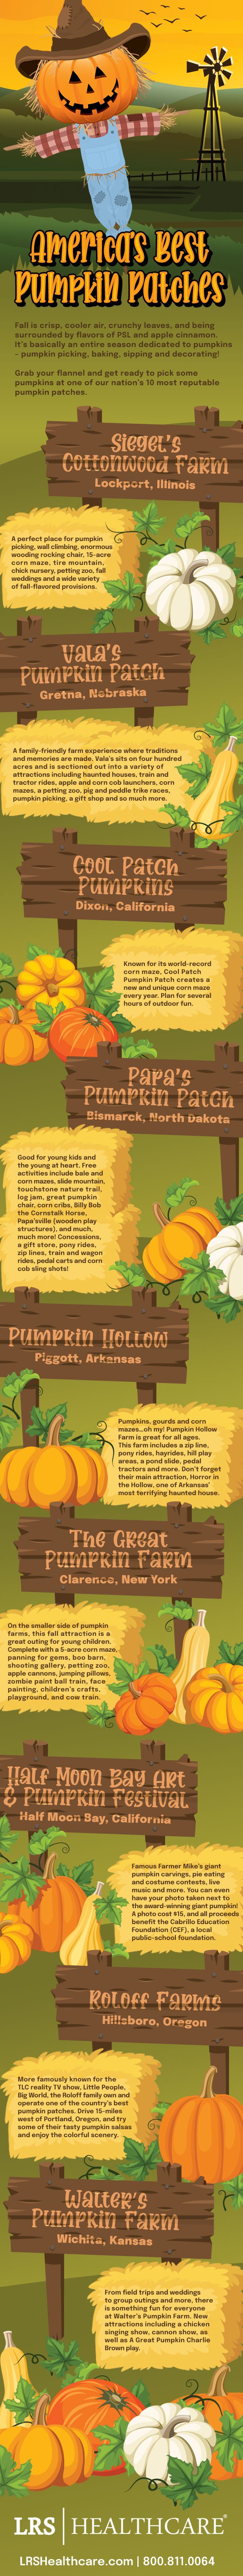 best pumpkin patches in America infographic